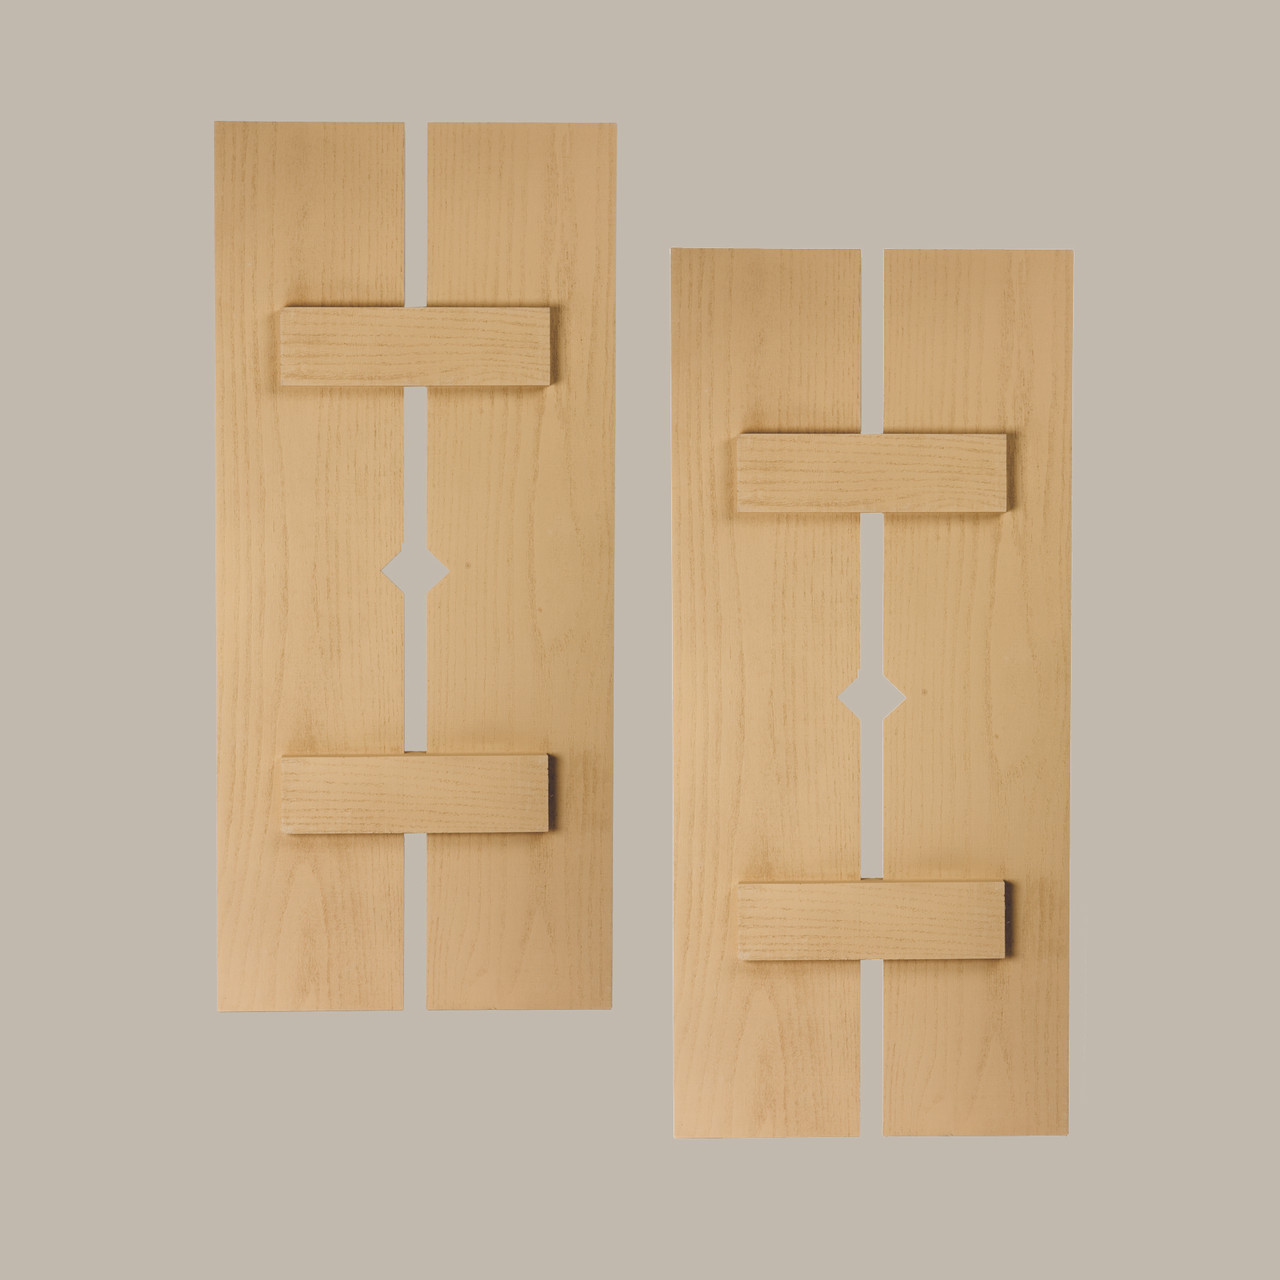 12 inch by 99 inch Plank Shutter with 2-Plank, Diamond